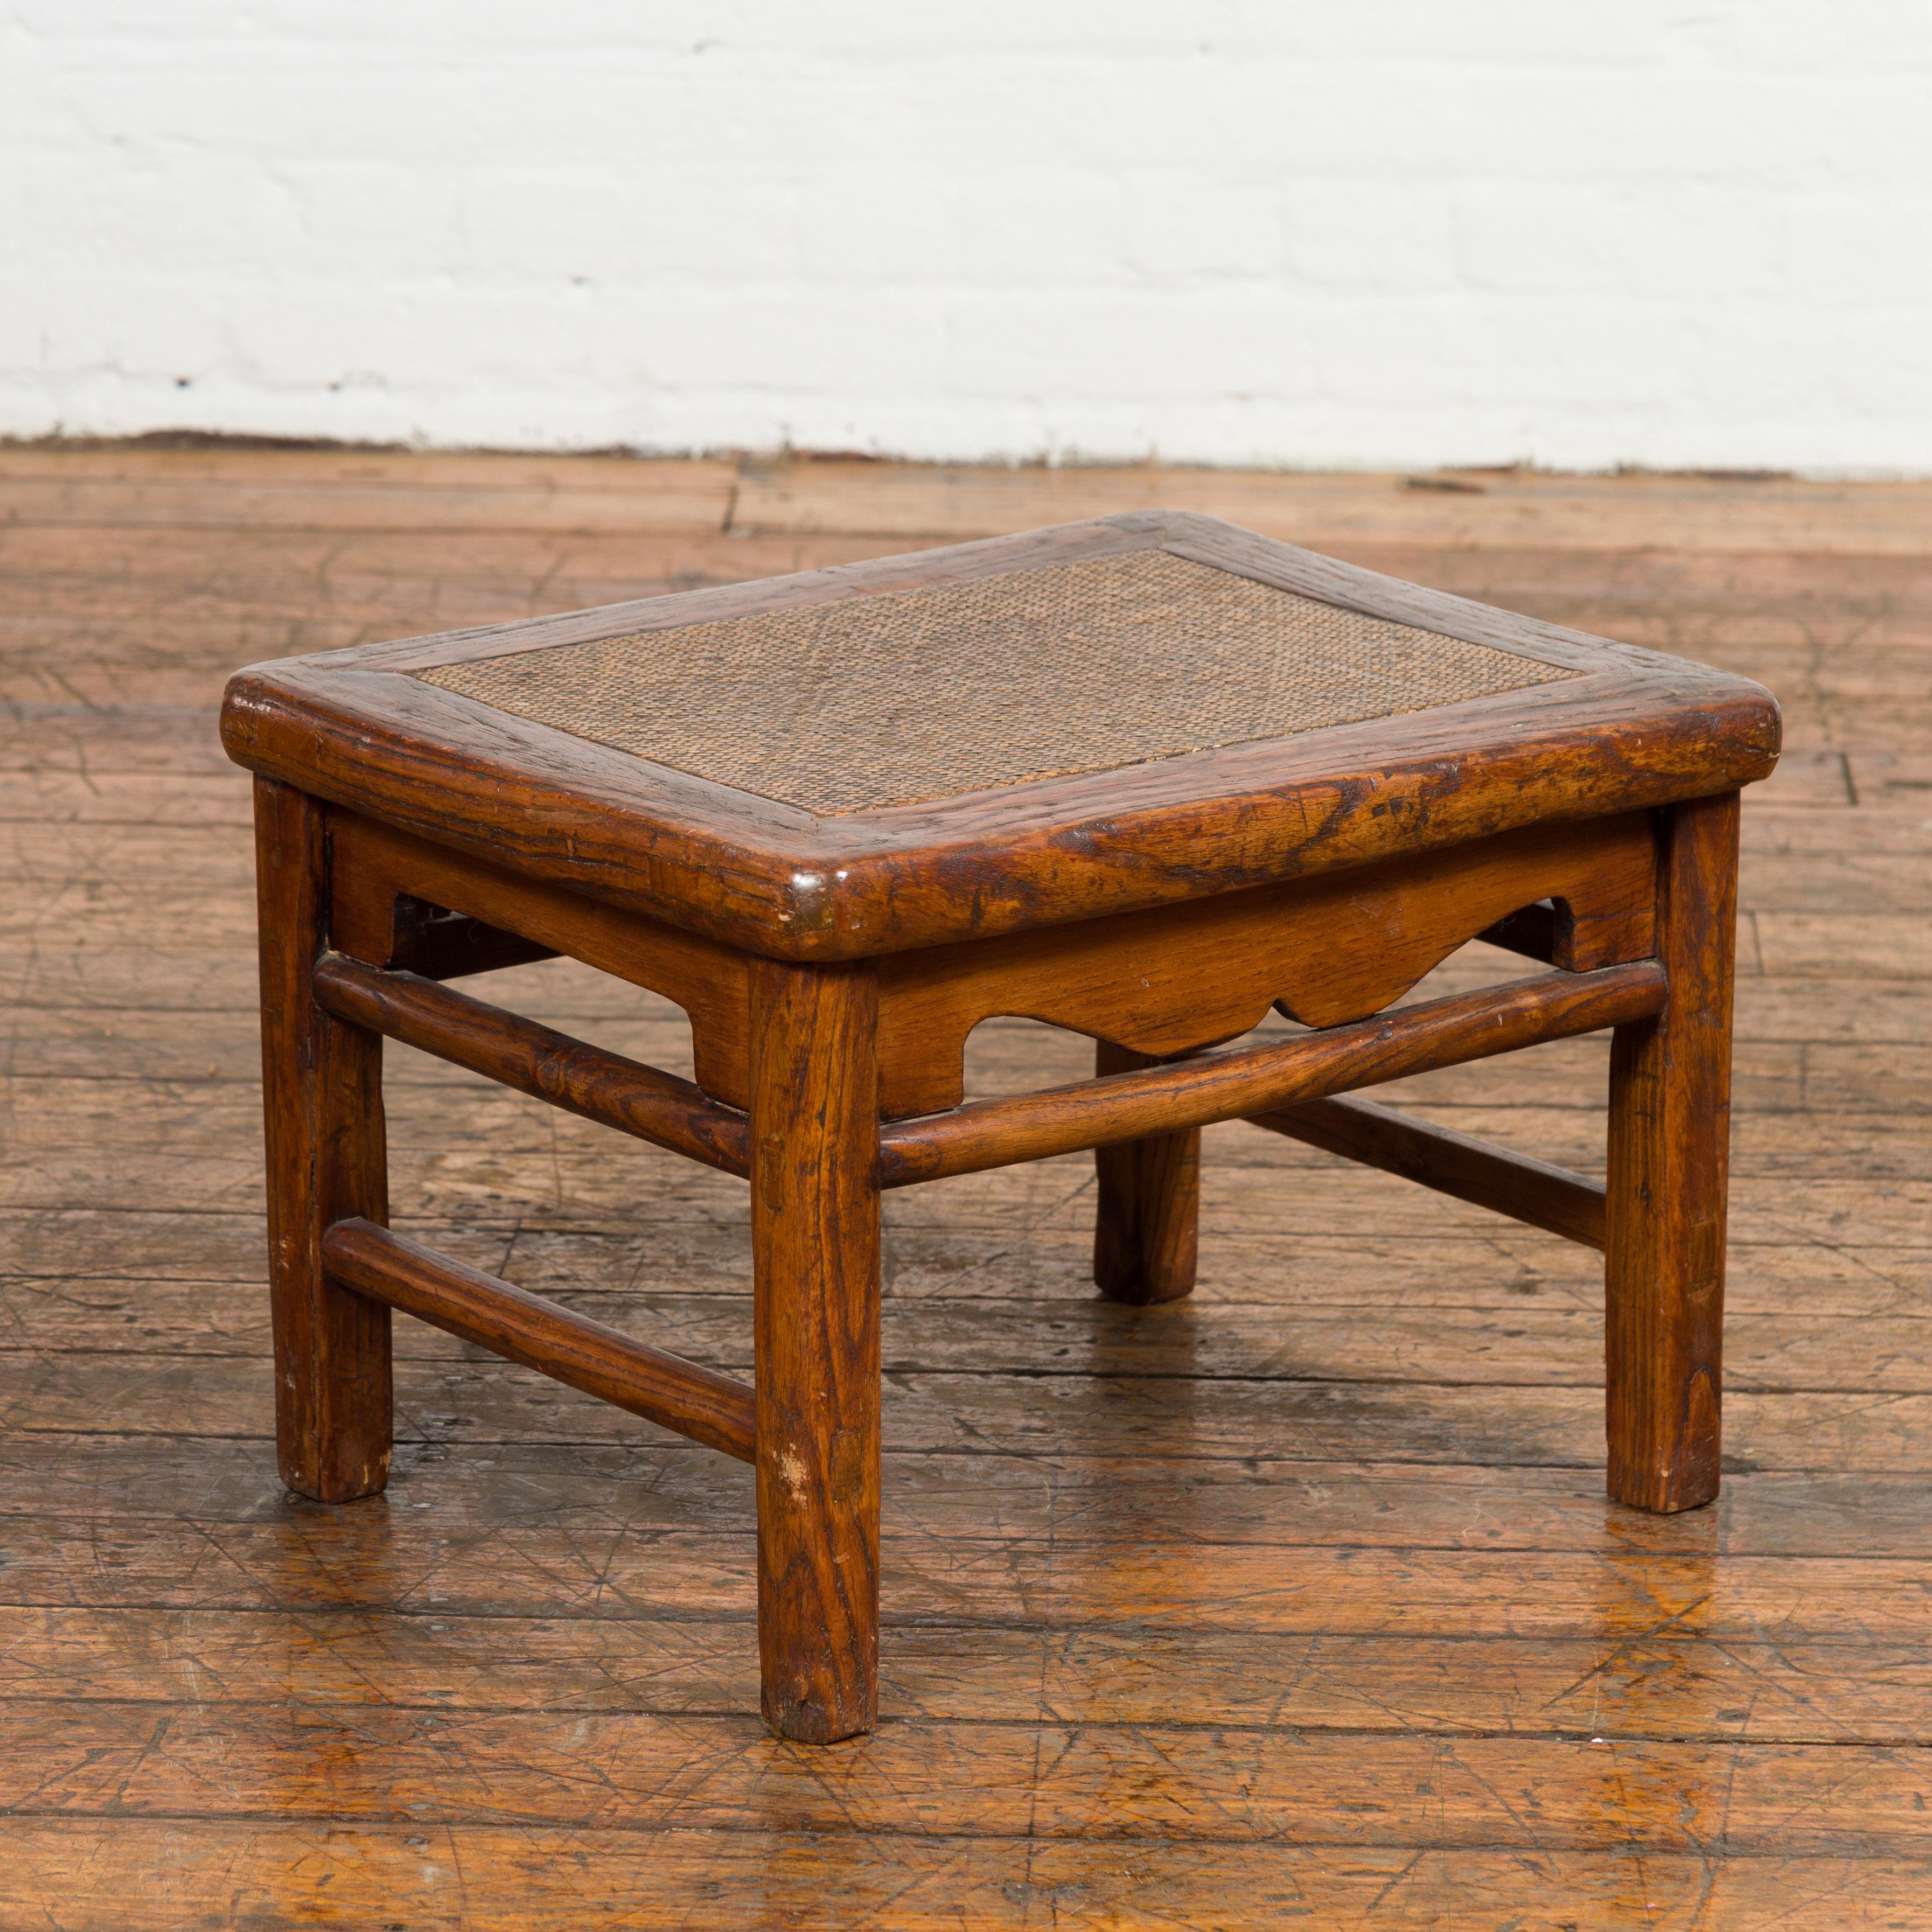 A Chinese late Qing Dynasty period footstool from the early 20th century with rattan top, carved apron and side stretchers. Discover the perfect blend of function and art in this early 20th-century Chinese footstool from the late Qing Dynasty